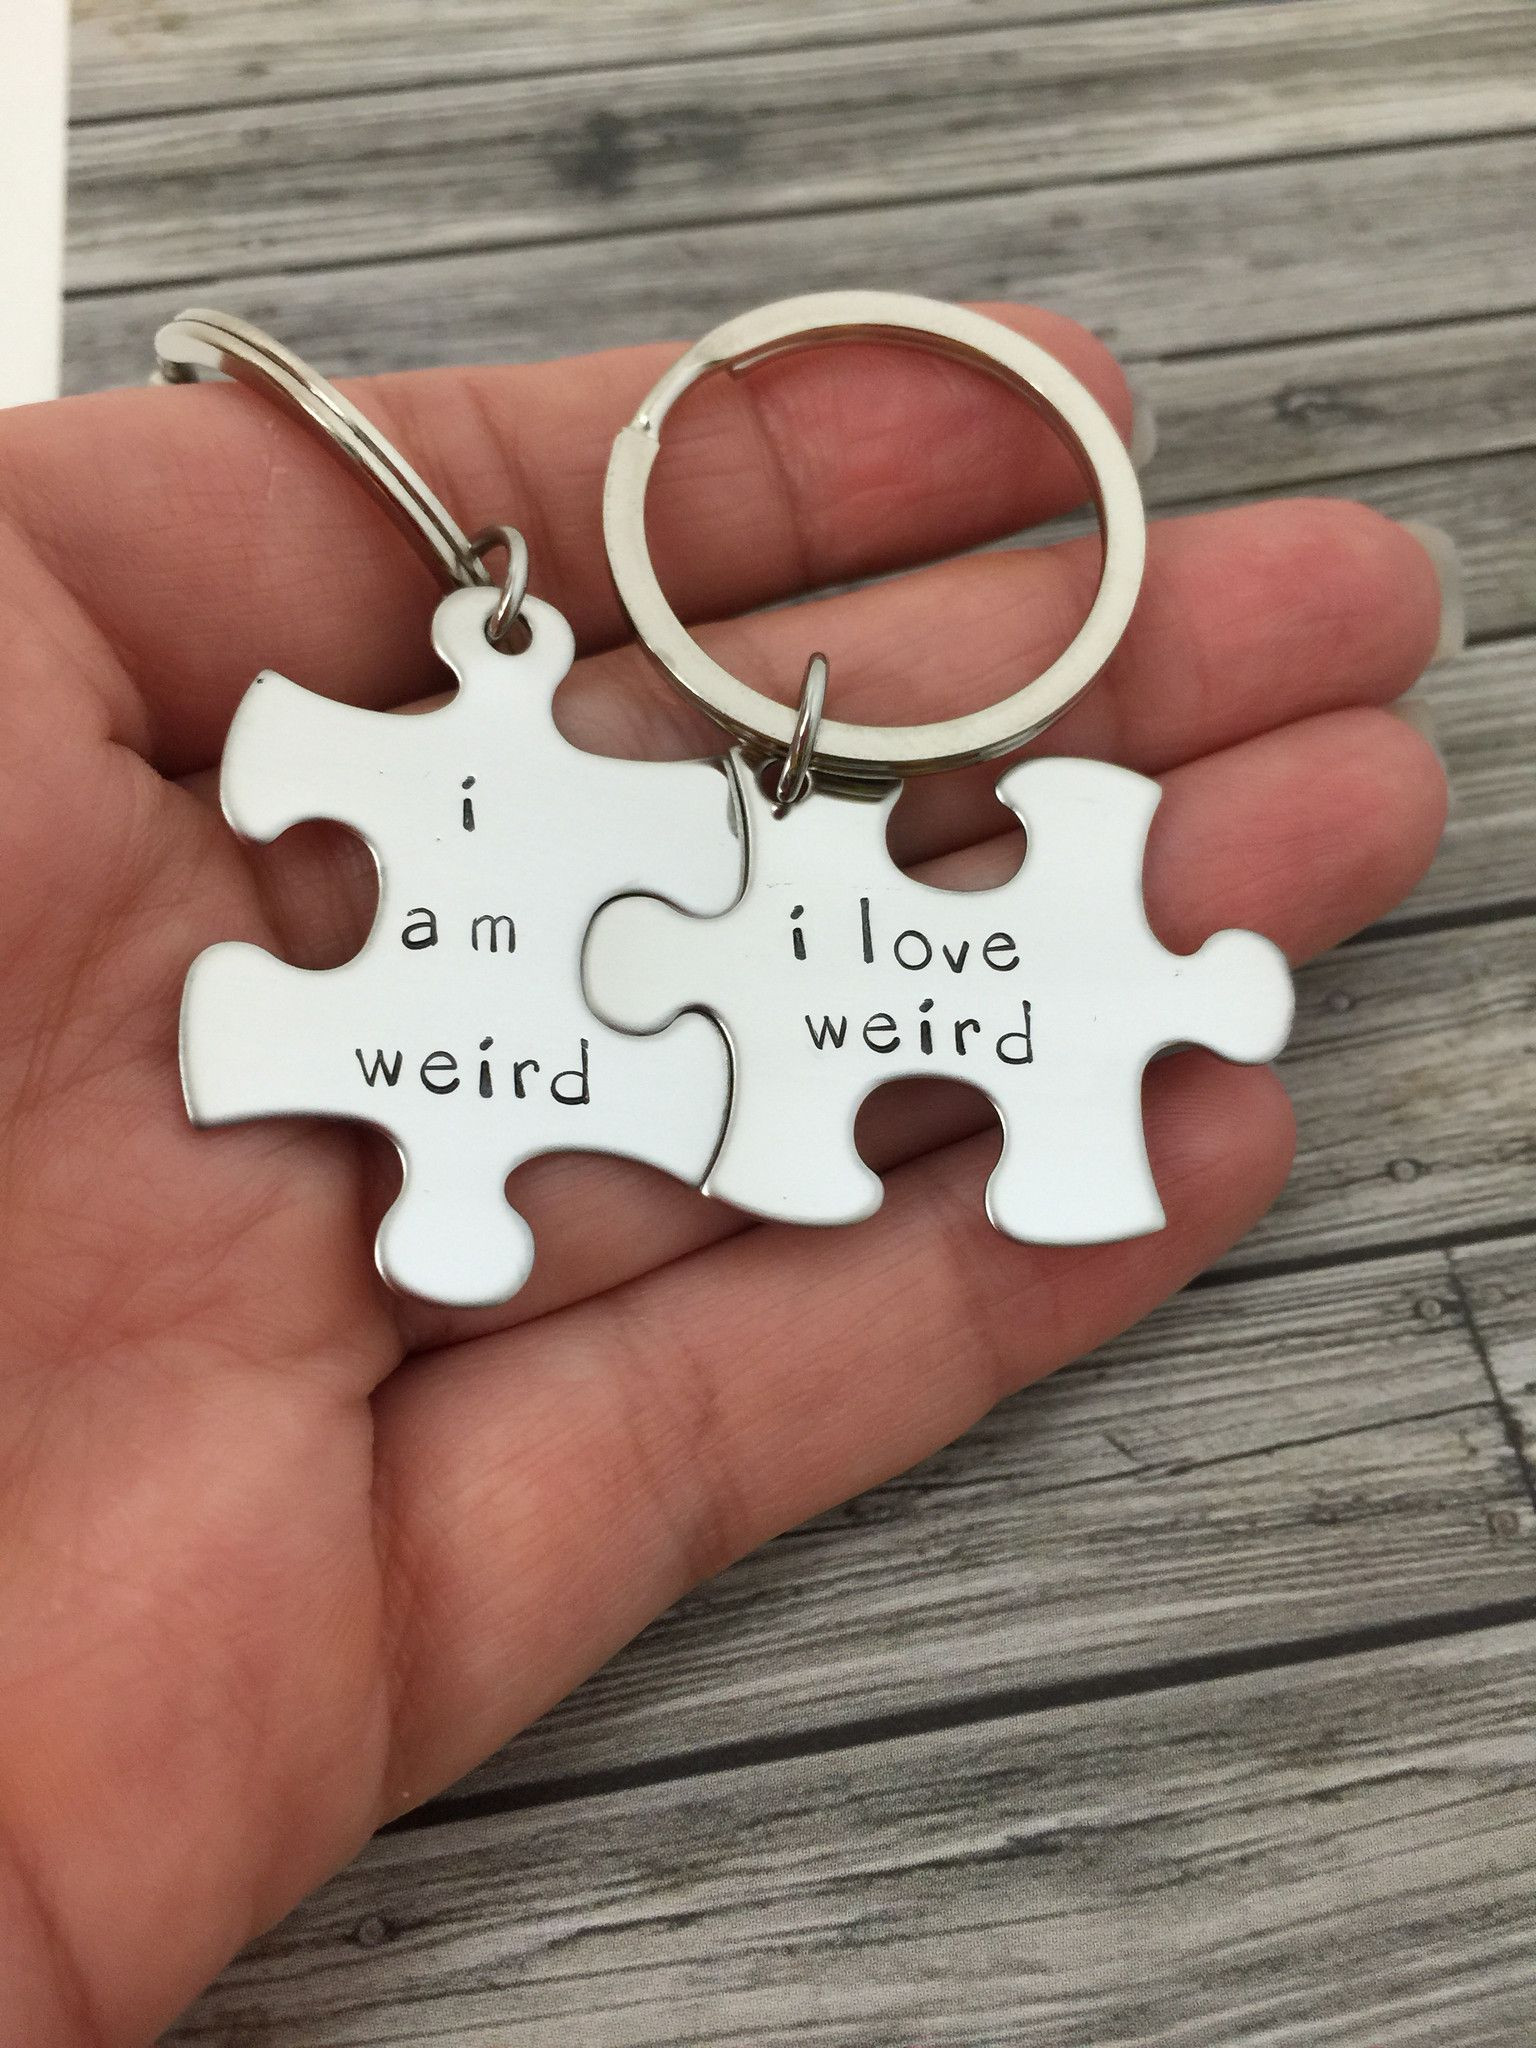 Funny Gift Ideas For Couples
 I am weird I love weird Couples Keychains Couples Gift